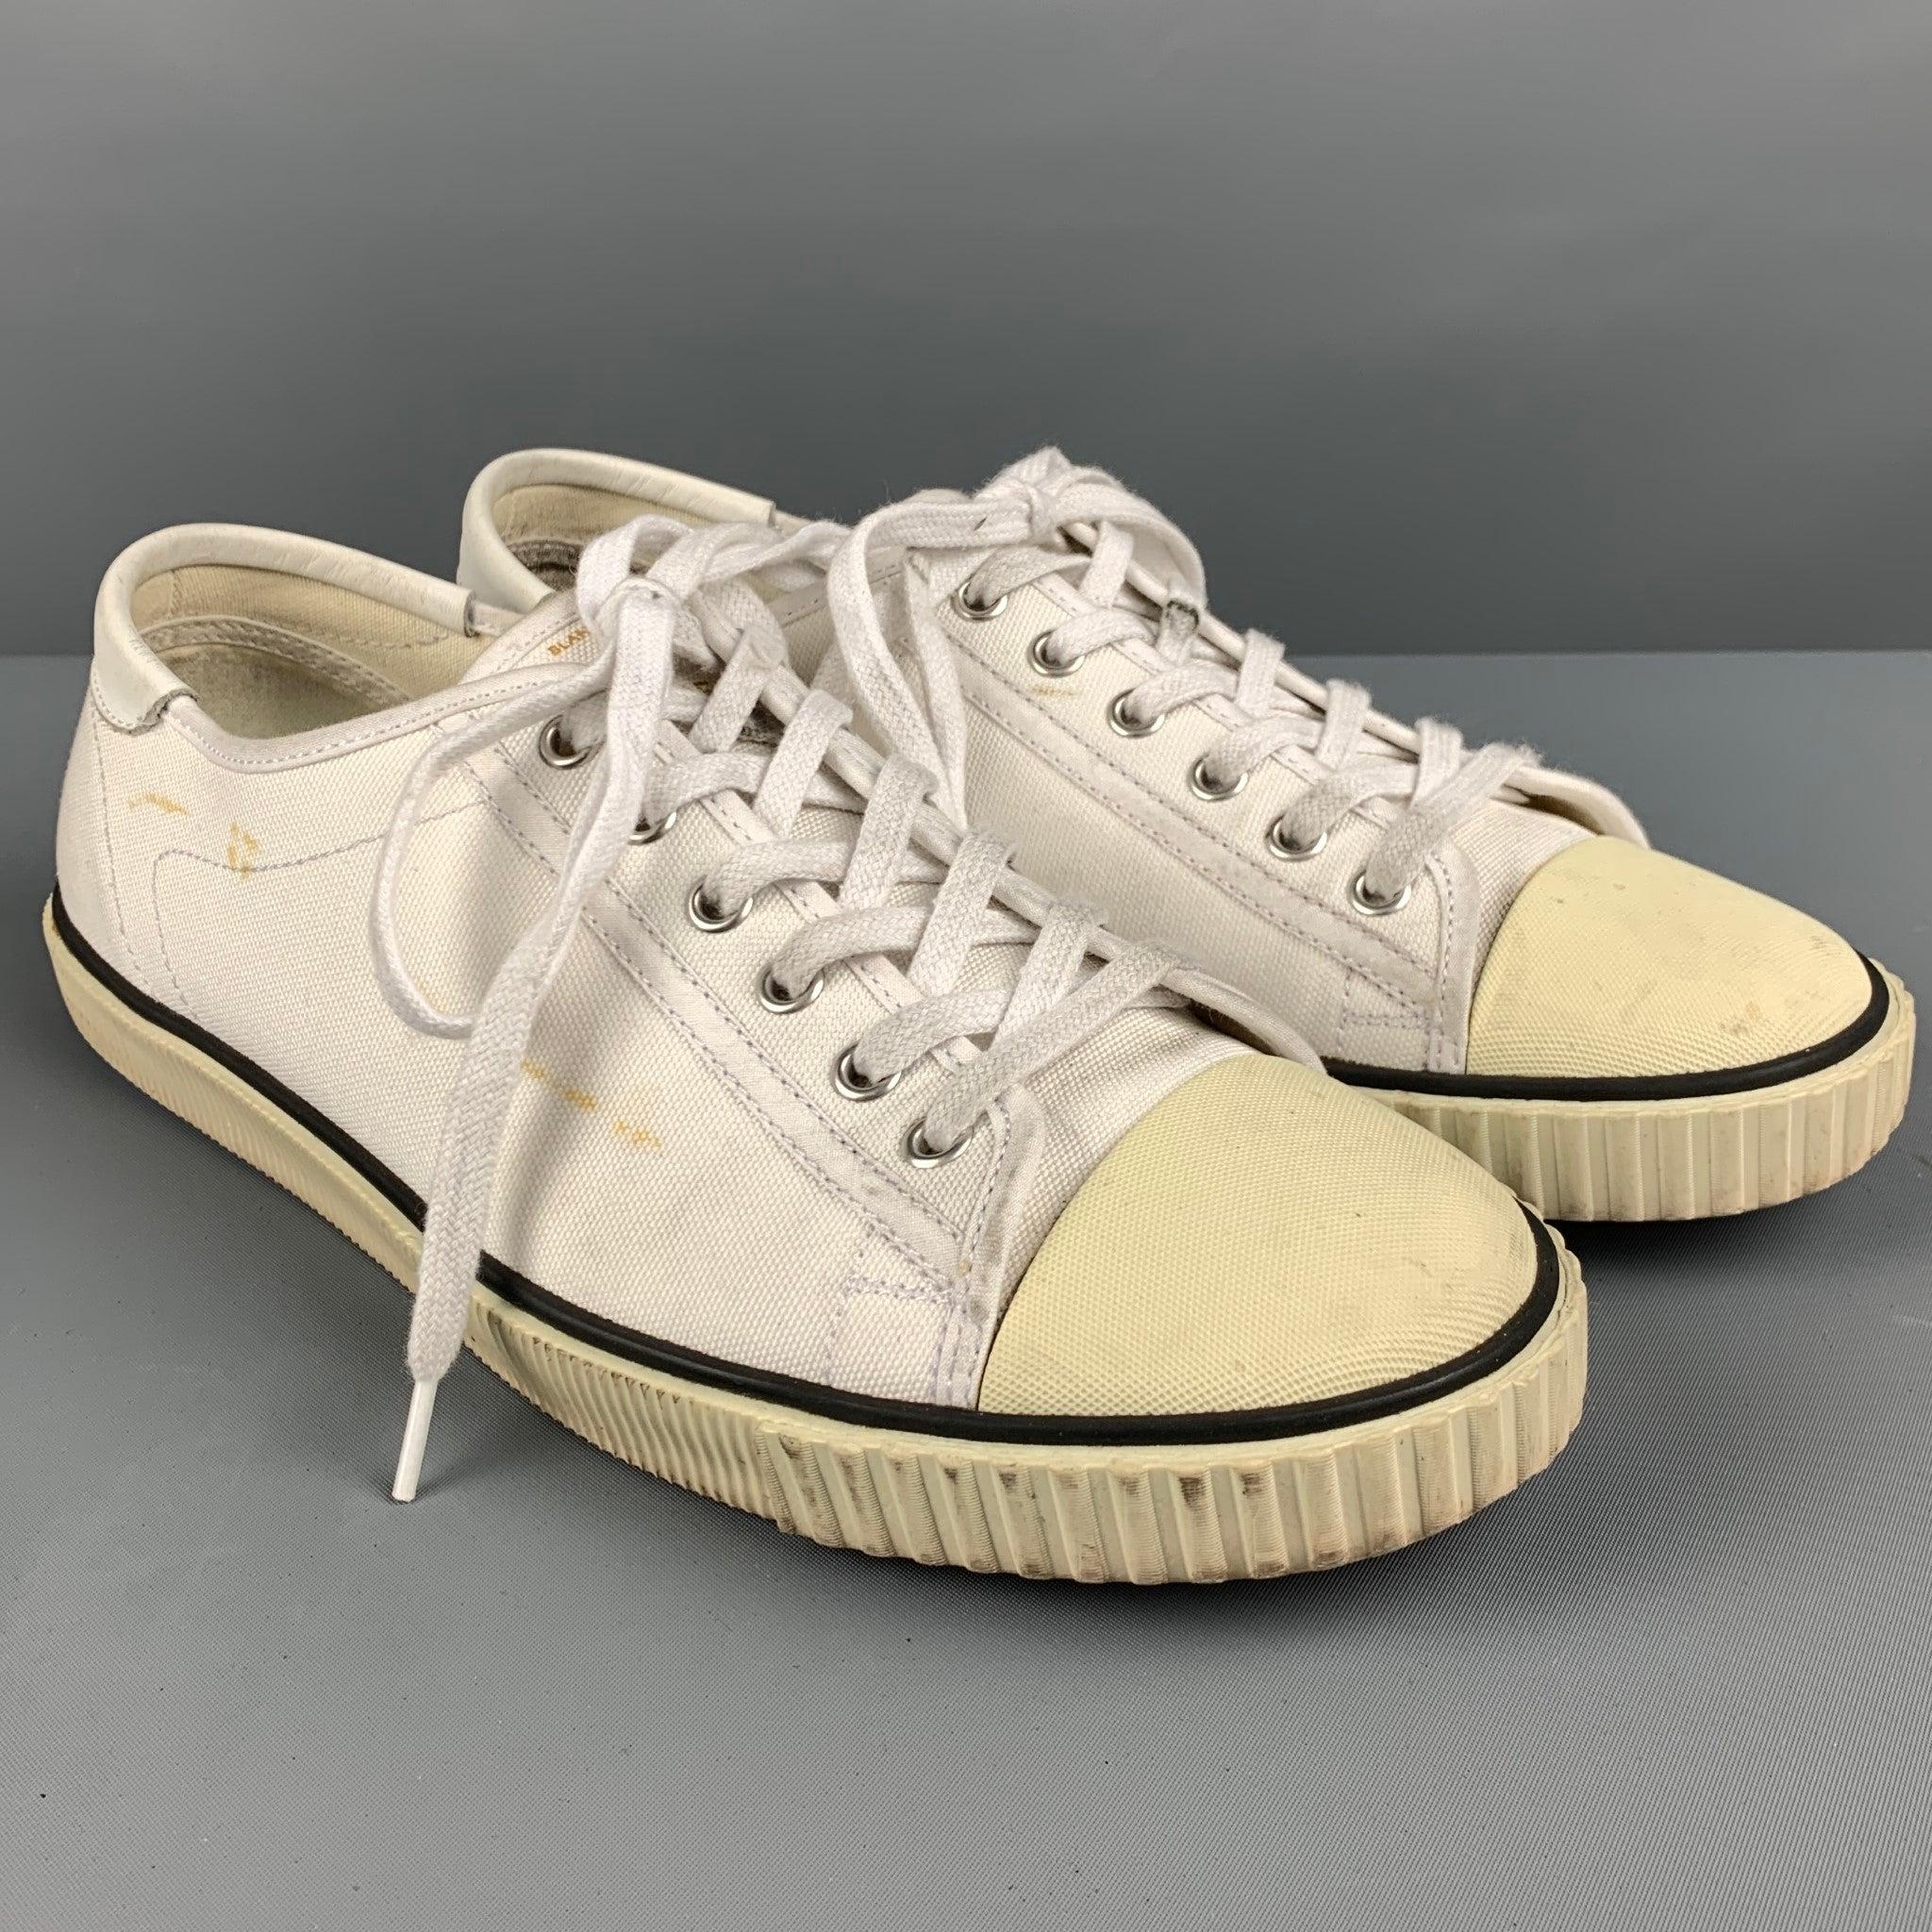 CELINE sneakers
in a white canvas fabric featuring a black trim, rubber tip, and lace up closure. Comes with box.Good Pre-Owned Condition. Moderate signs of wear, please check photos. As is. 

Marked:   8Outsole: 11 inches  x 4 inches  
  
 